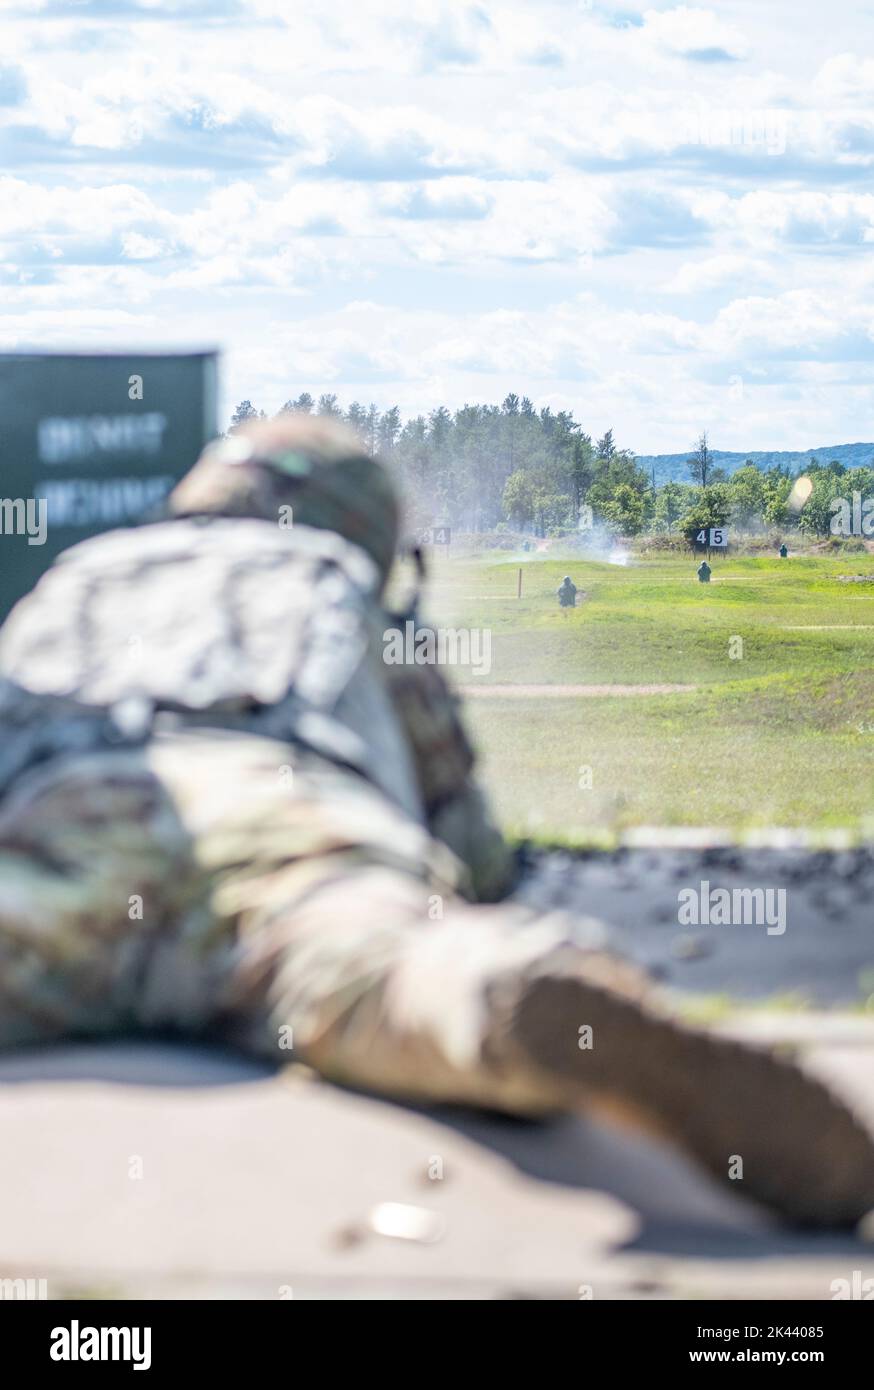 Soldiers with the 370th Chemical Company participate in weapons qualifications on ranges at Fort McCoy, Wis., as part of the Red Dragon exercise in August, 2022. U.S. Army photo by Kevin W. Clark Stock Photo